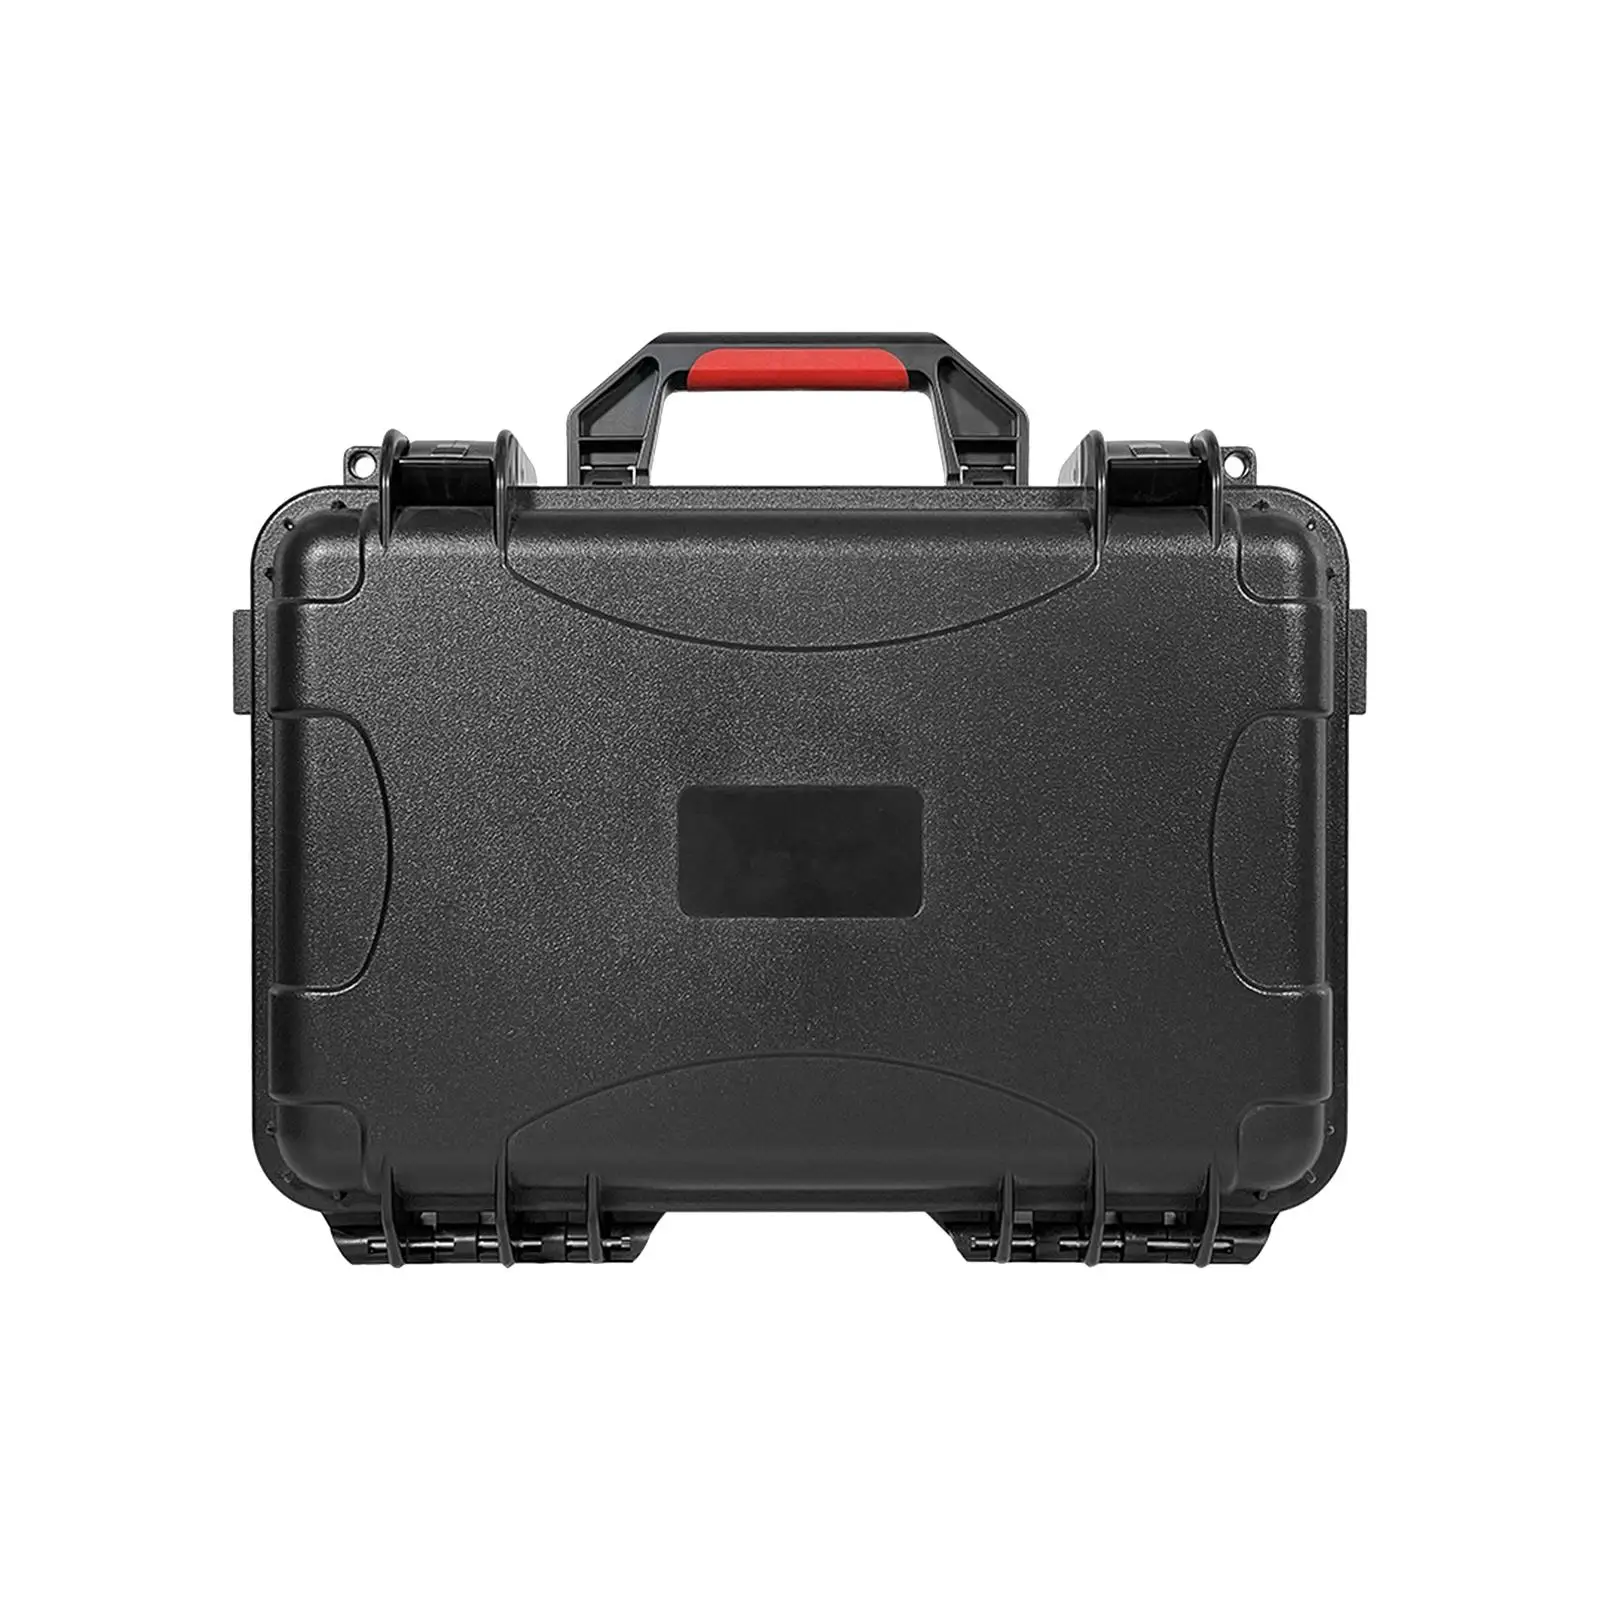 Storage Box Protect Toolbox Protective Equipment Impact Resistant Suitcase Safety Sealed Tool Box for Hone Workplace Accessory